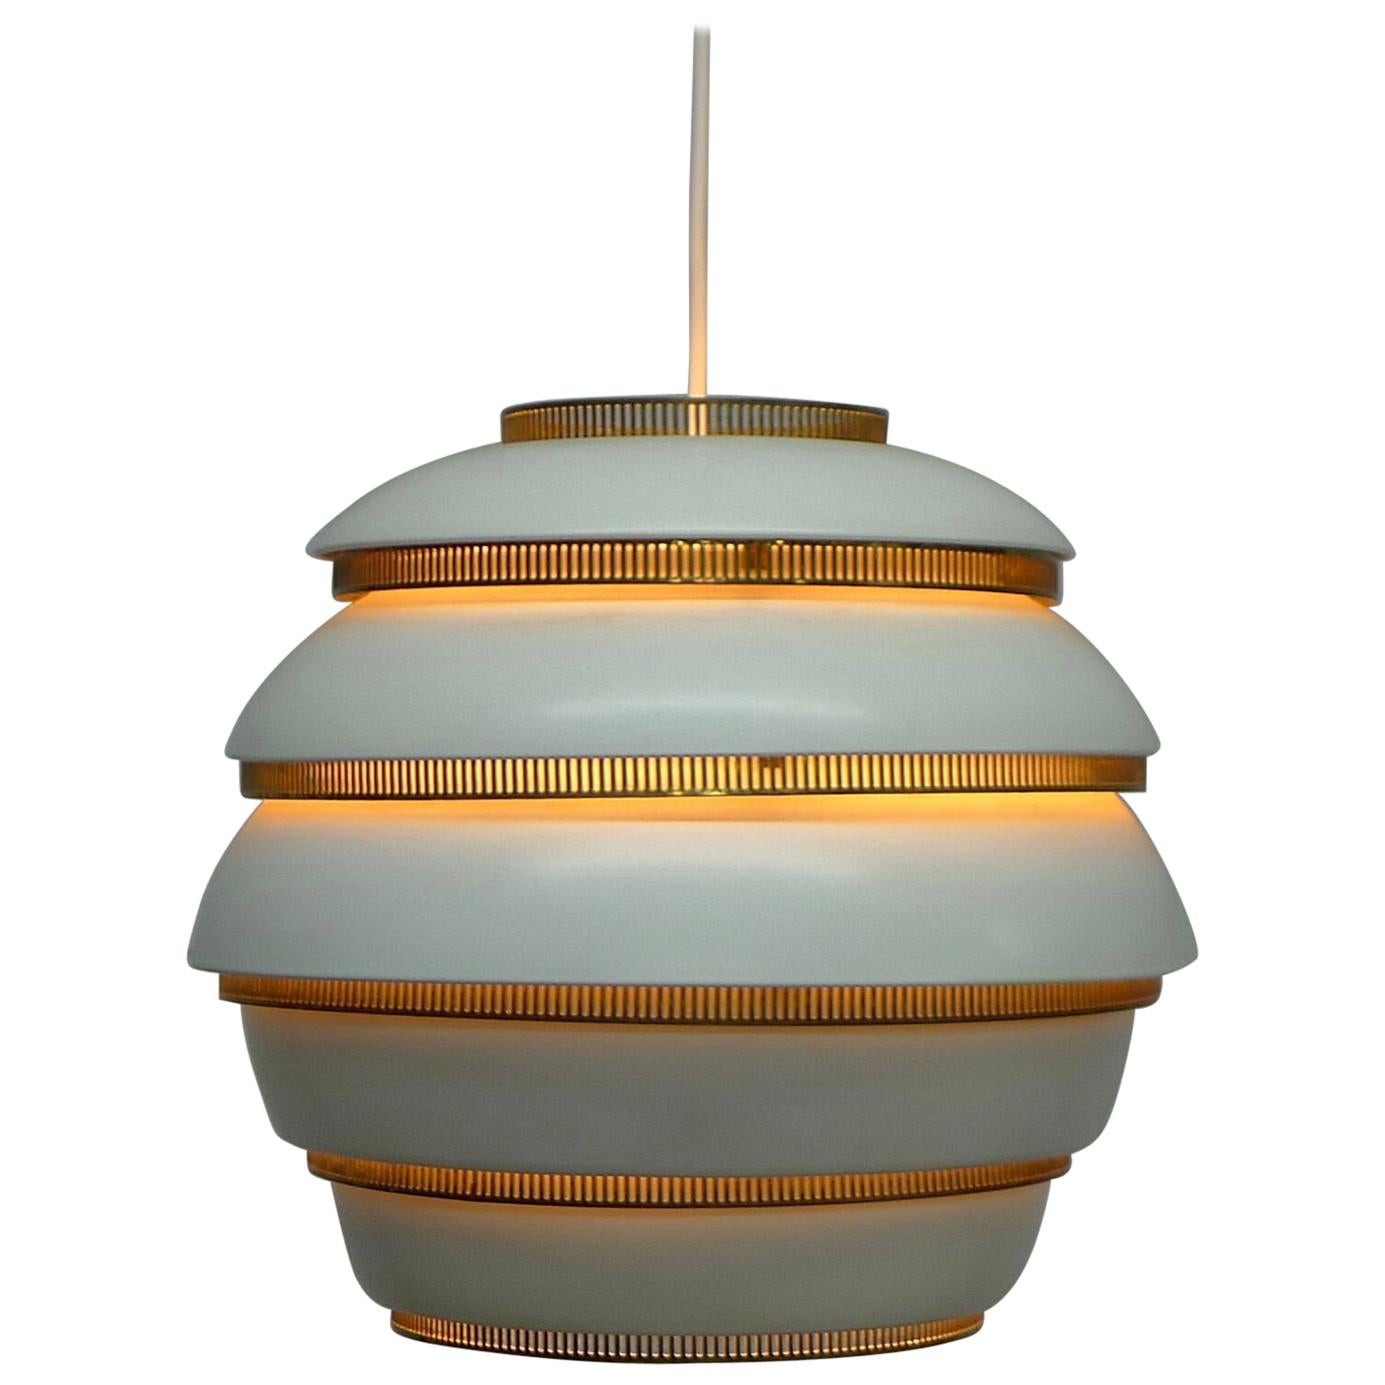 Alvar Aalto, First Production Stamped Valaistustyo A331, Beehive Lamp, 1950s